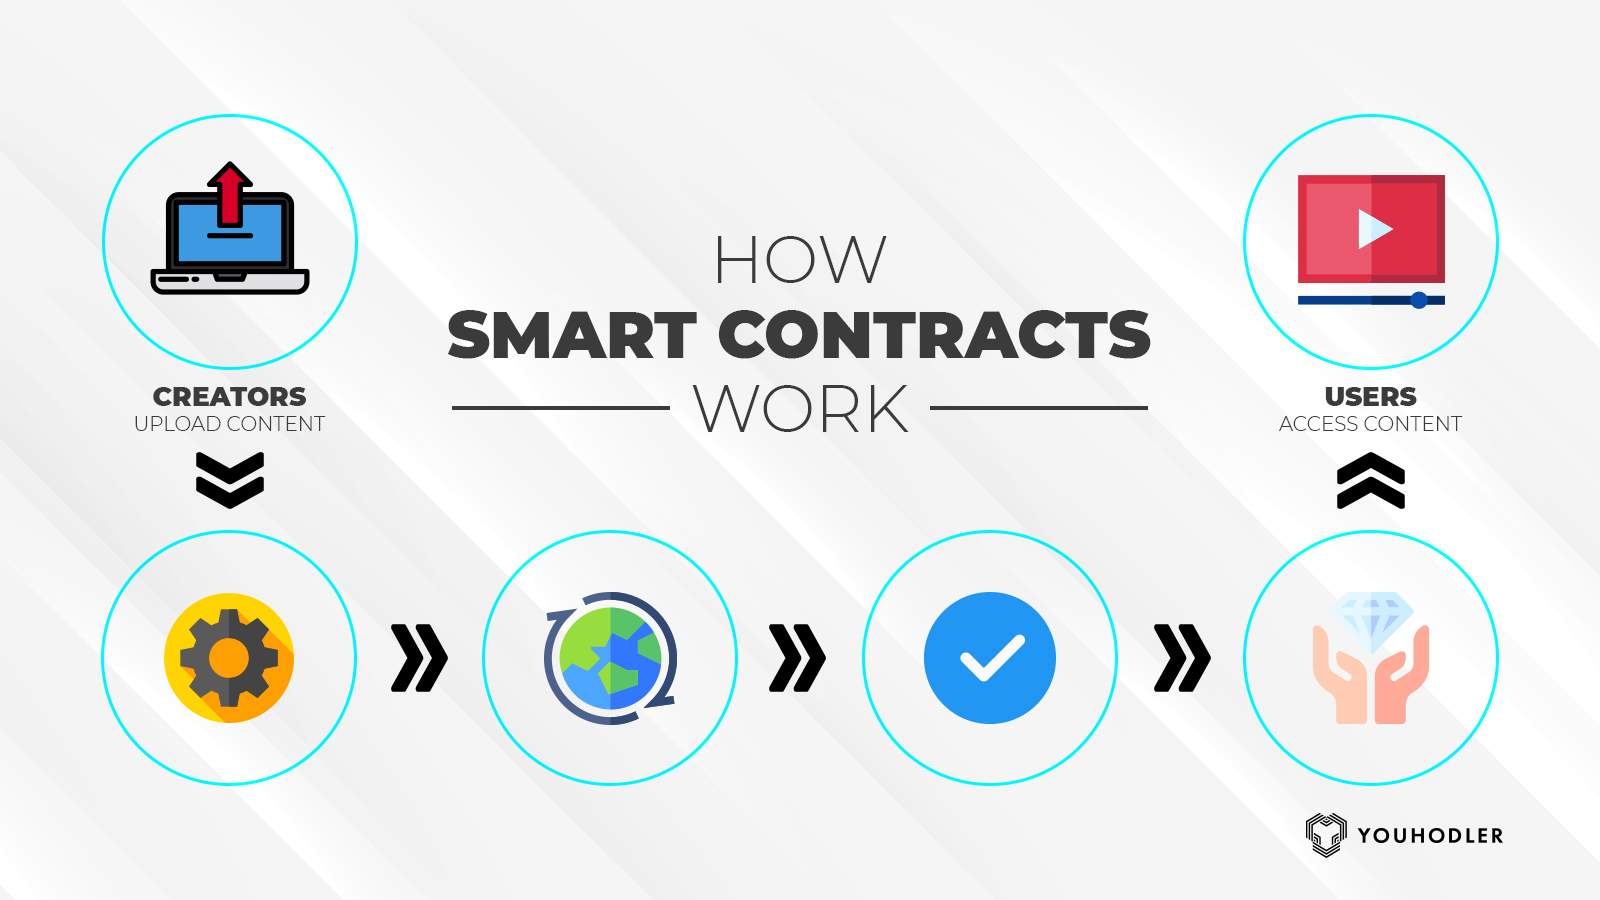 How Do Ethereum Smart Contracts Work? - CoinDesk